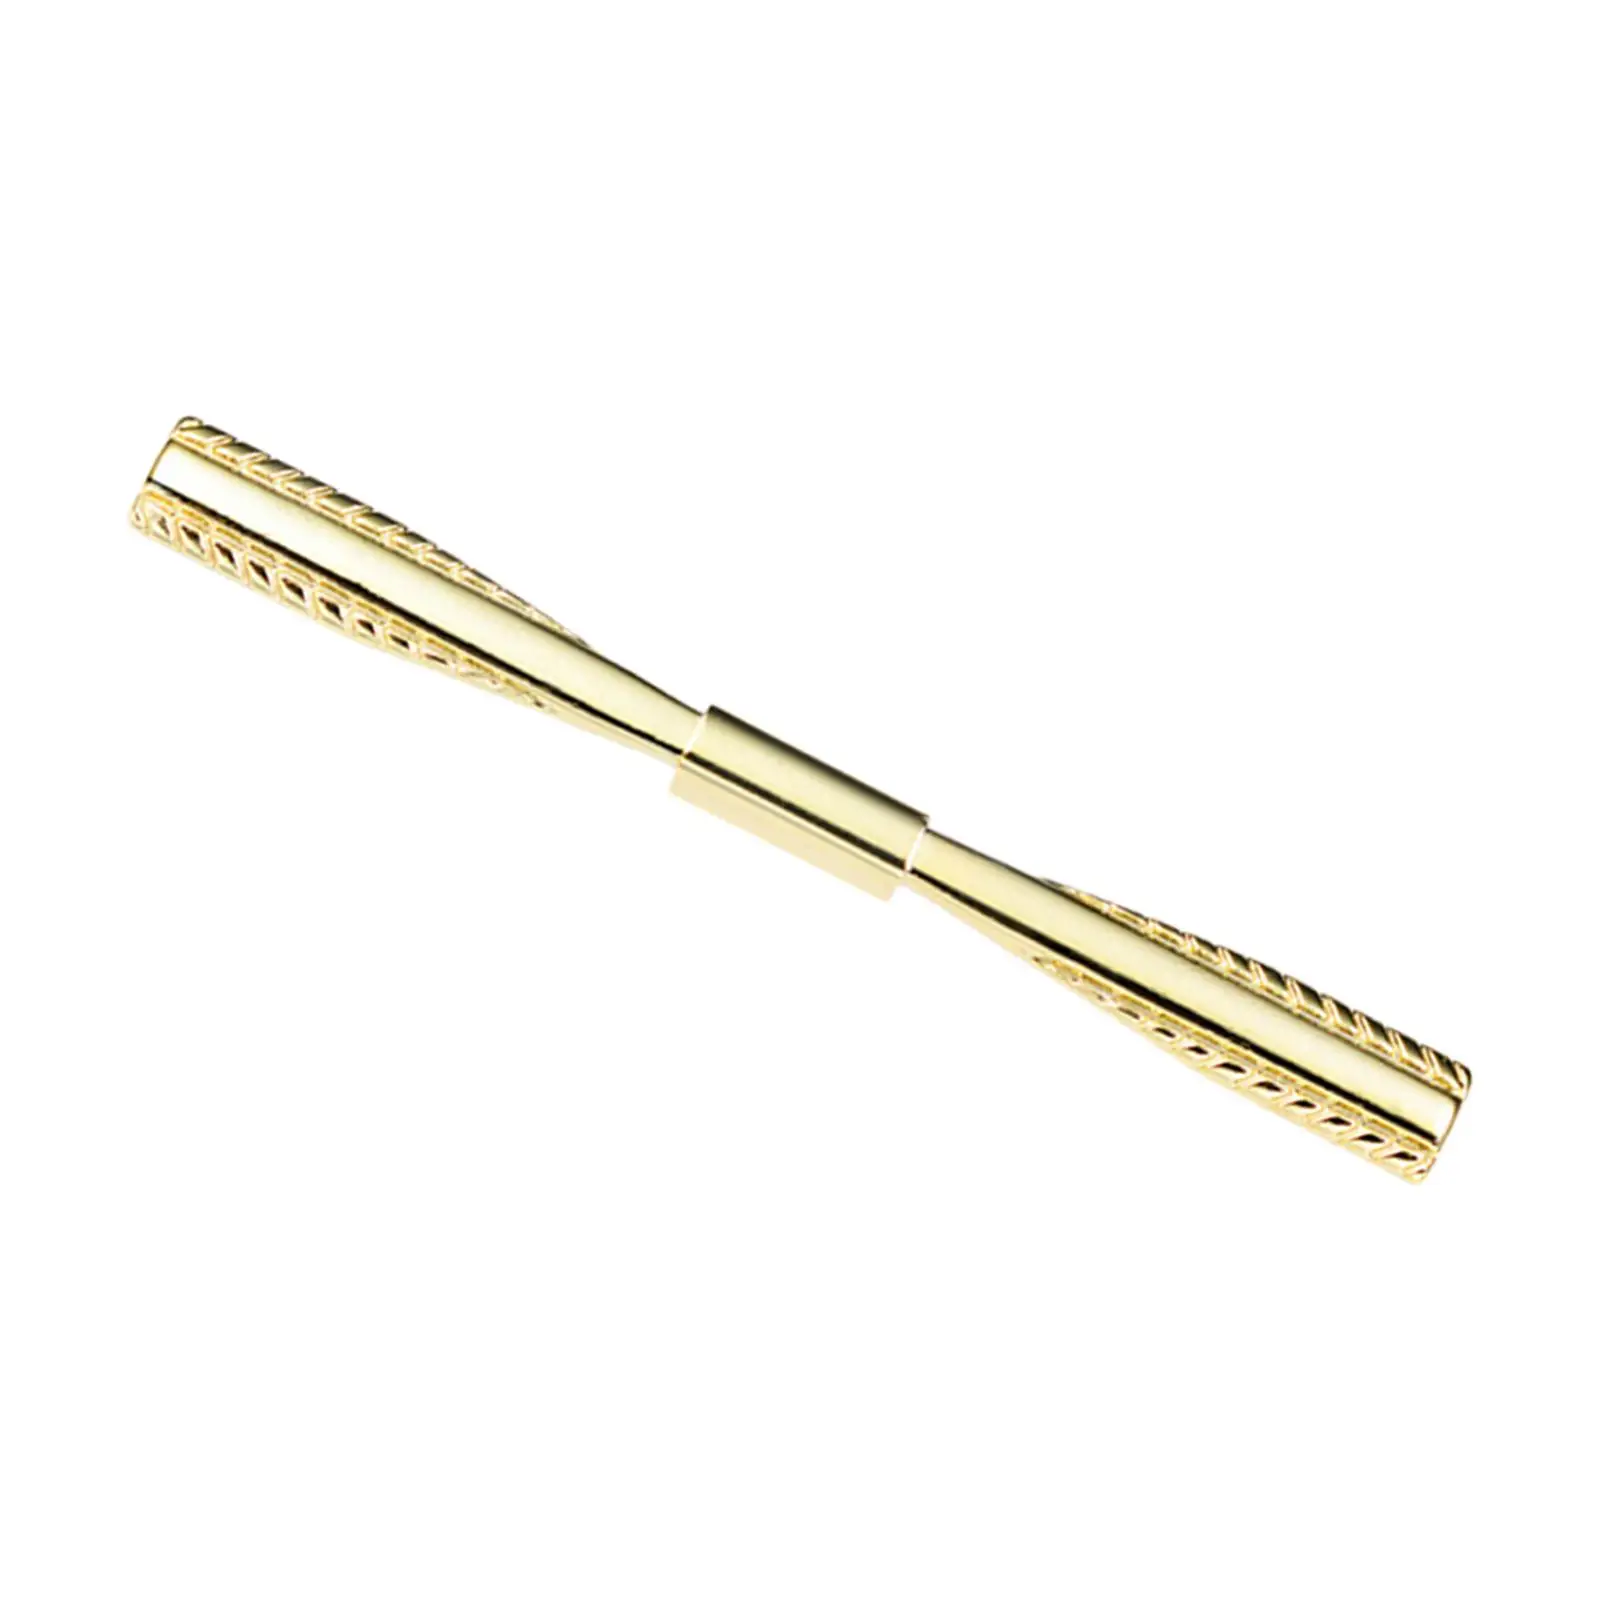 Men Tie Clips Shirt Collar Clip for Wedding Anniversary Business and Daily Life 2.4inch Long Made of Copper Material Accessories